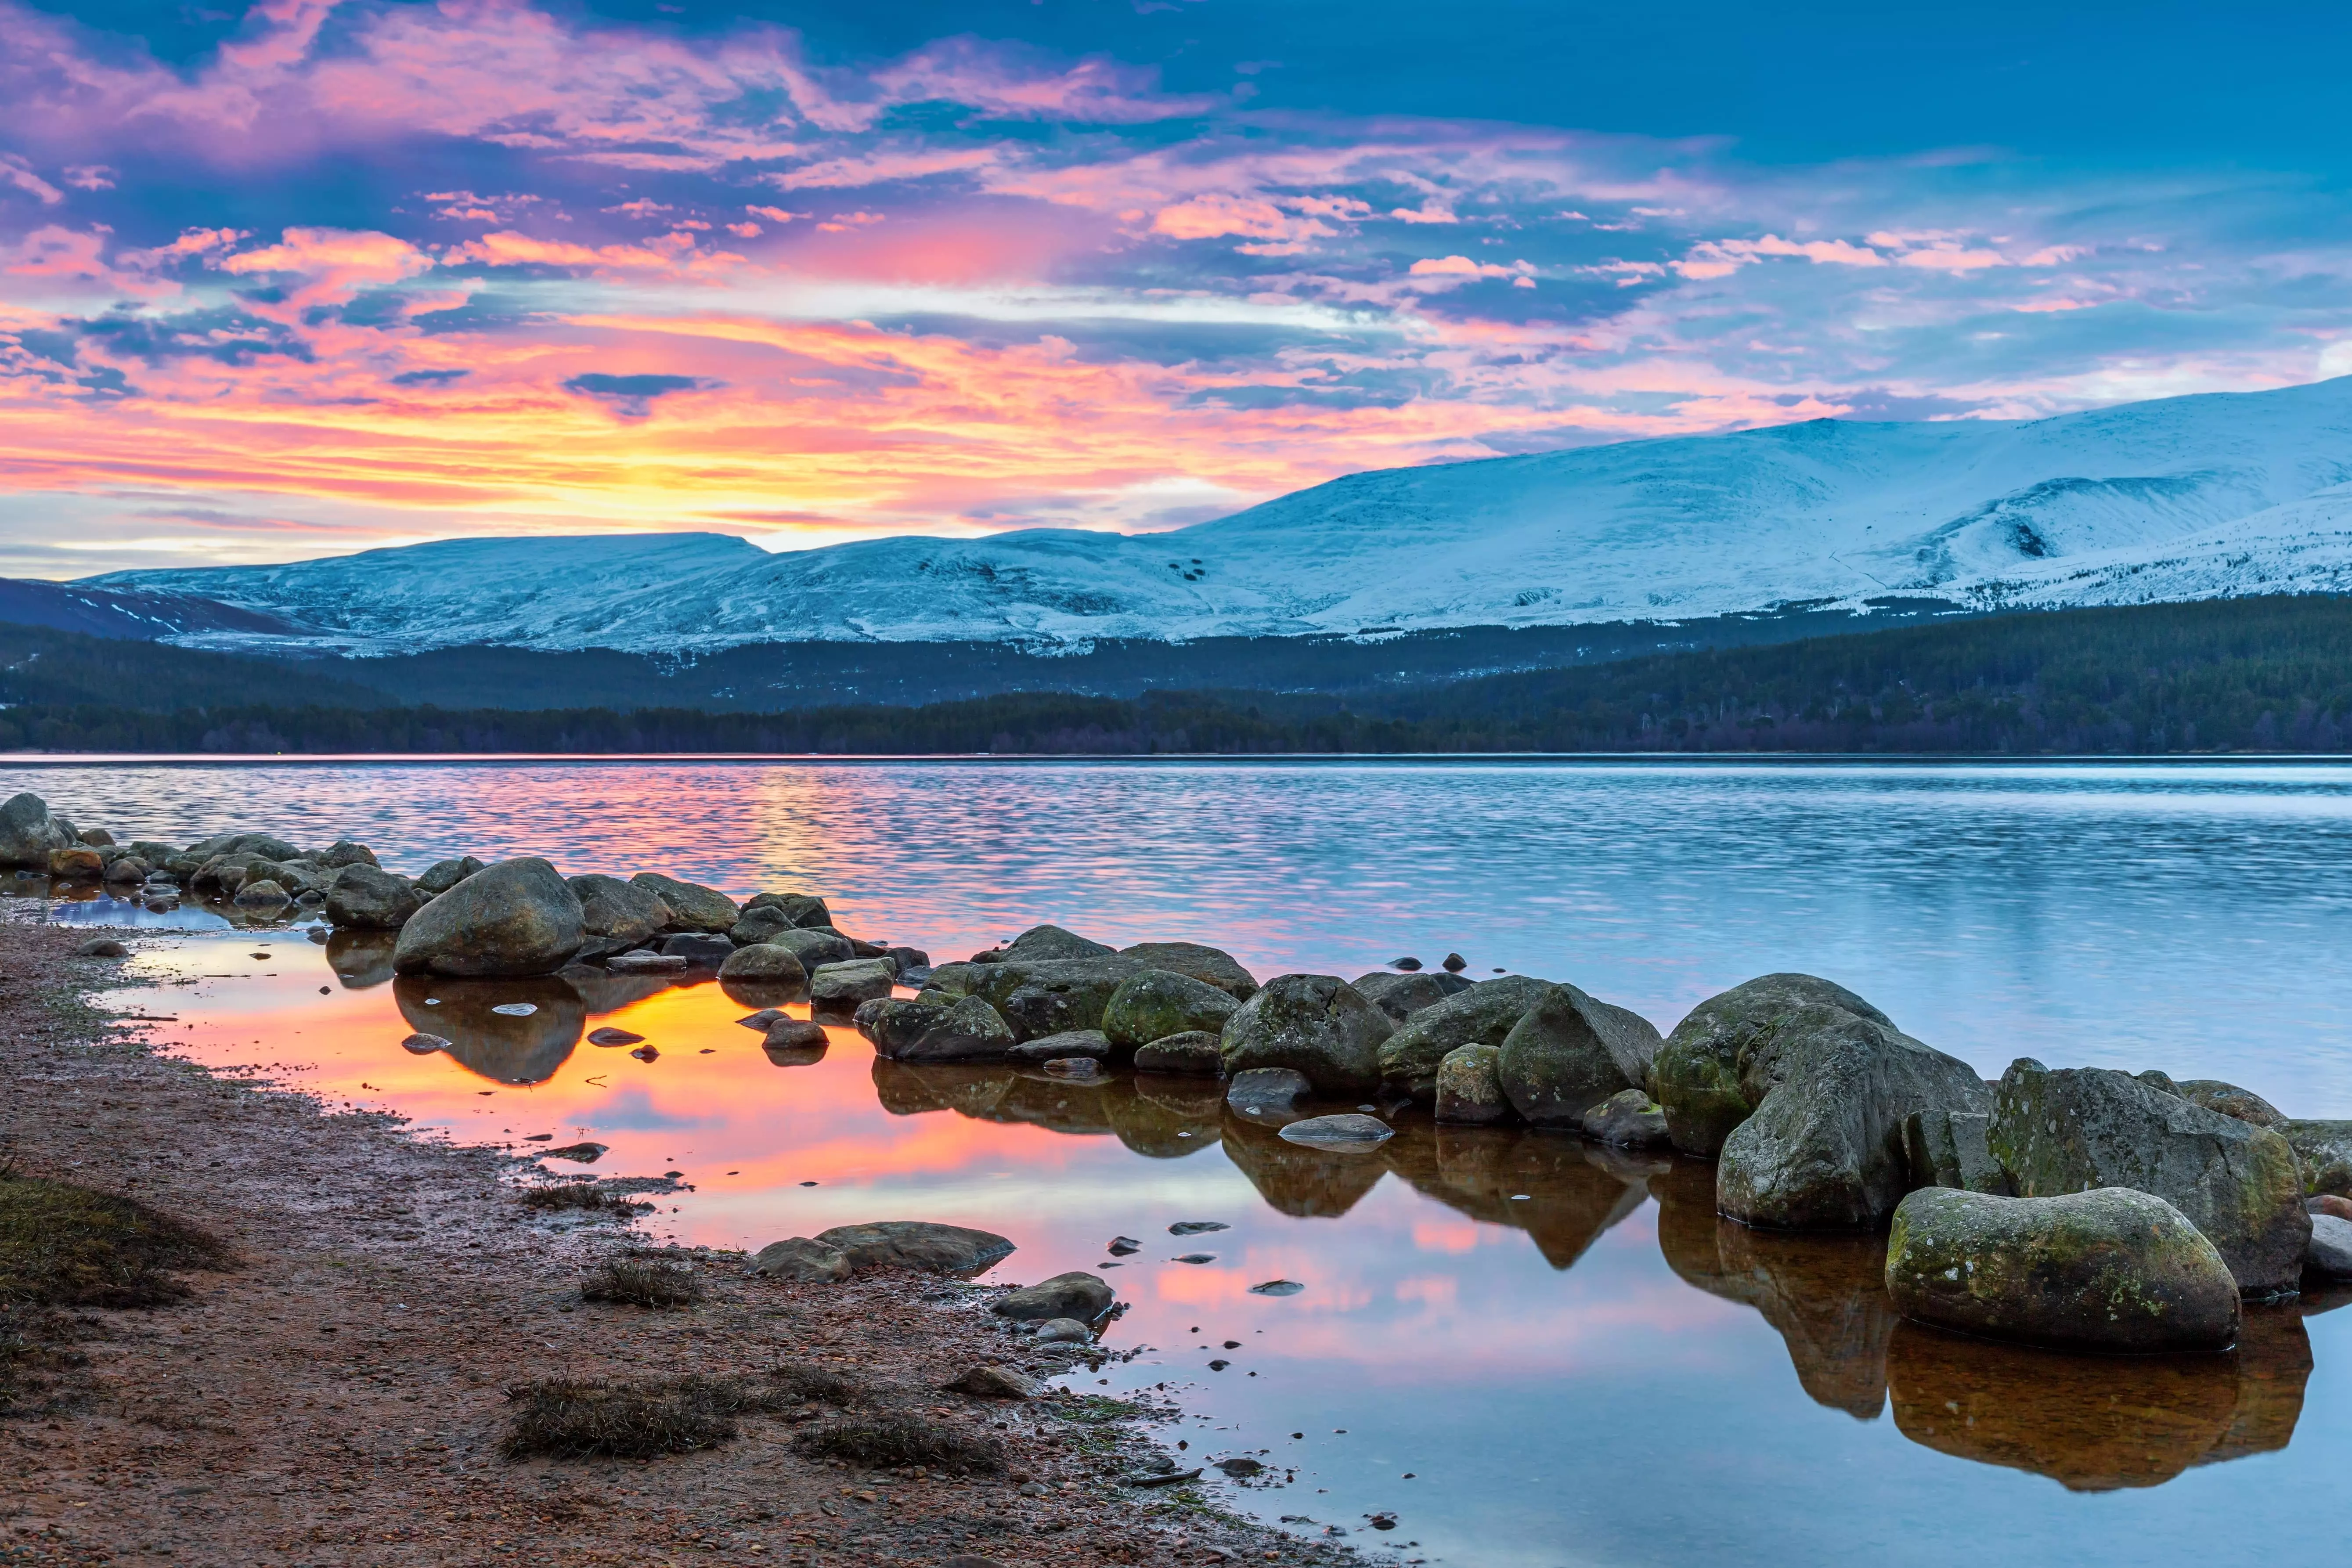 An wonderful sunrise at Loch Morlich in the Cairngorms National Park, Scotland